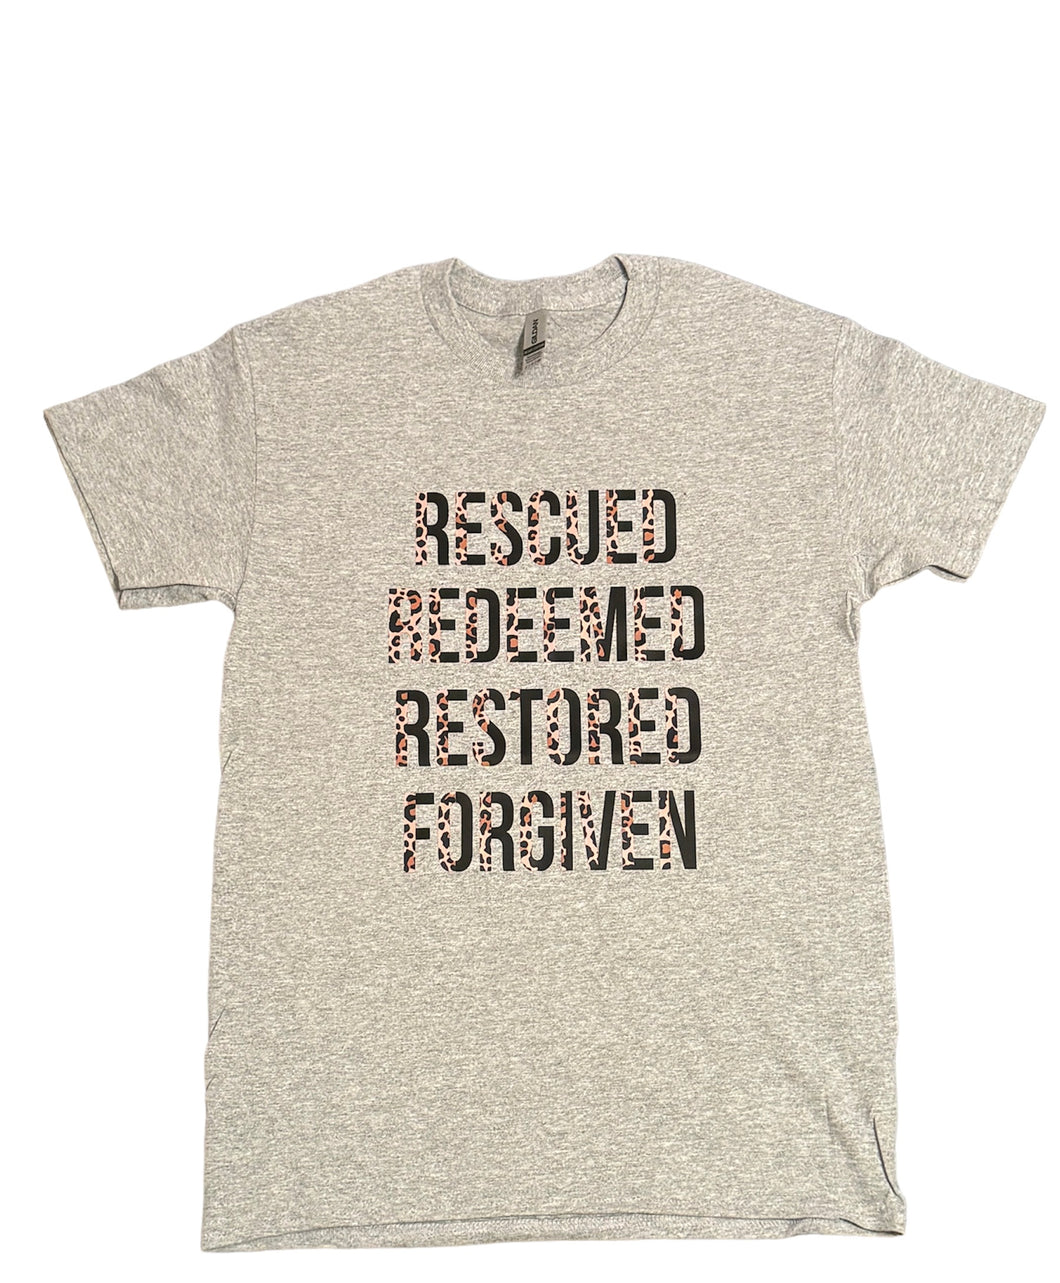 Rescue Redeemed Restored Forgiven Tee